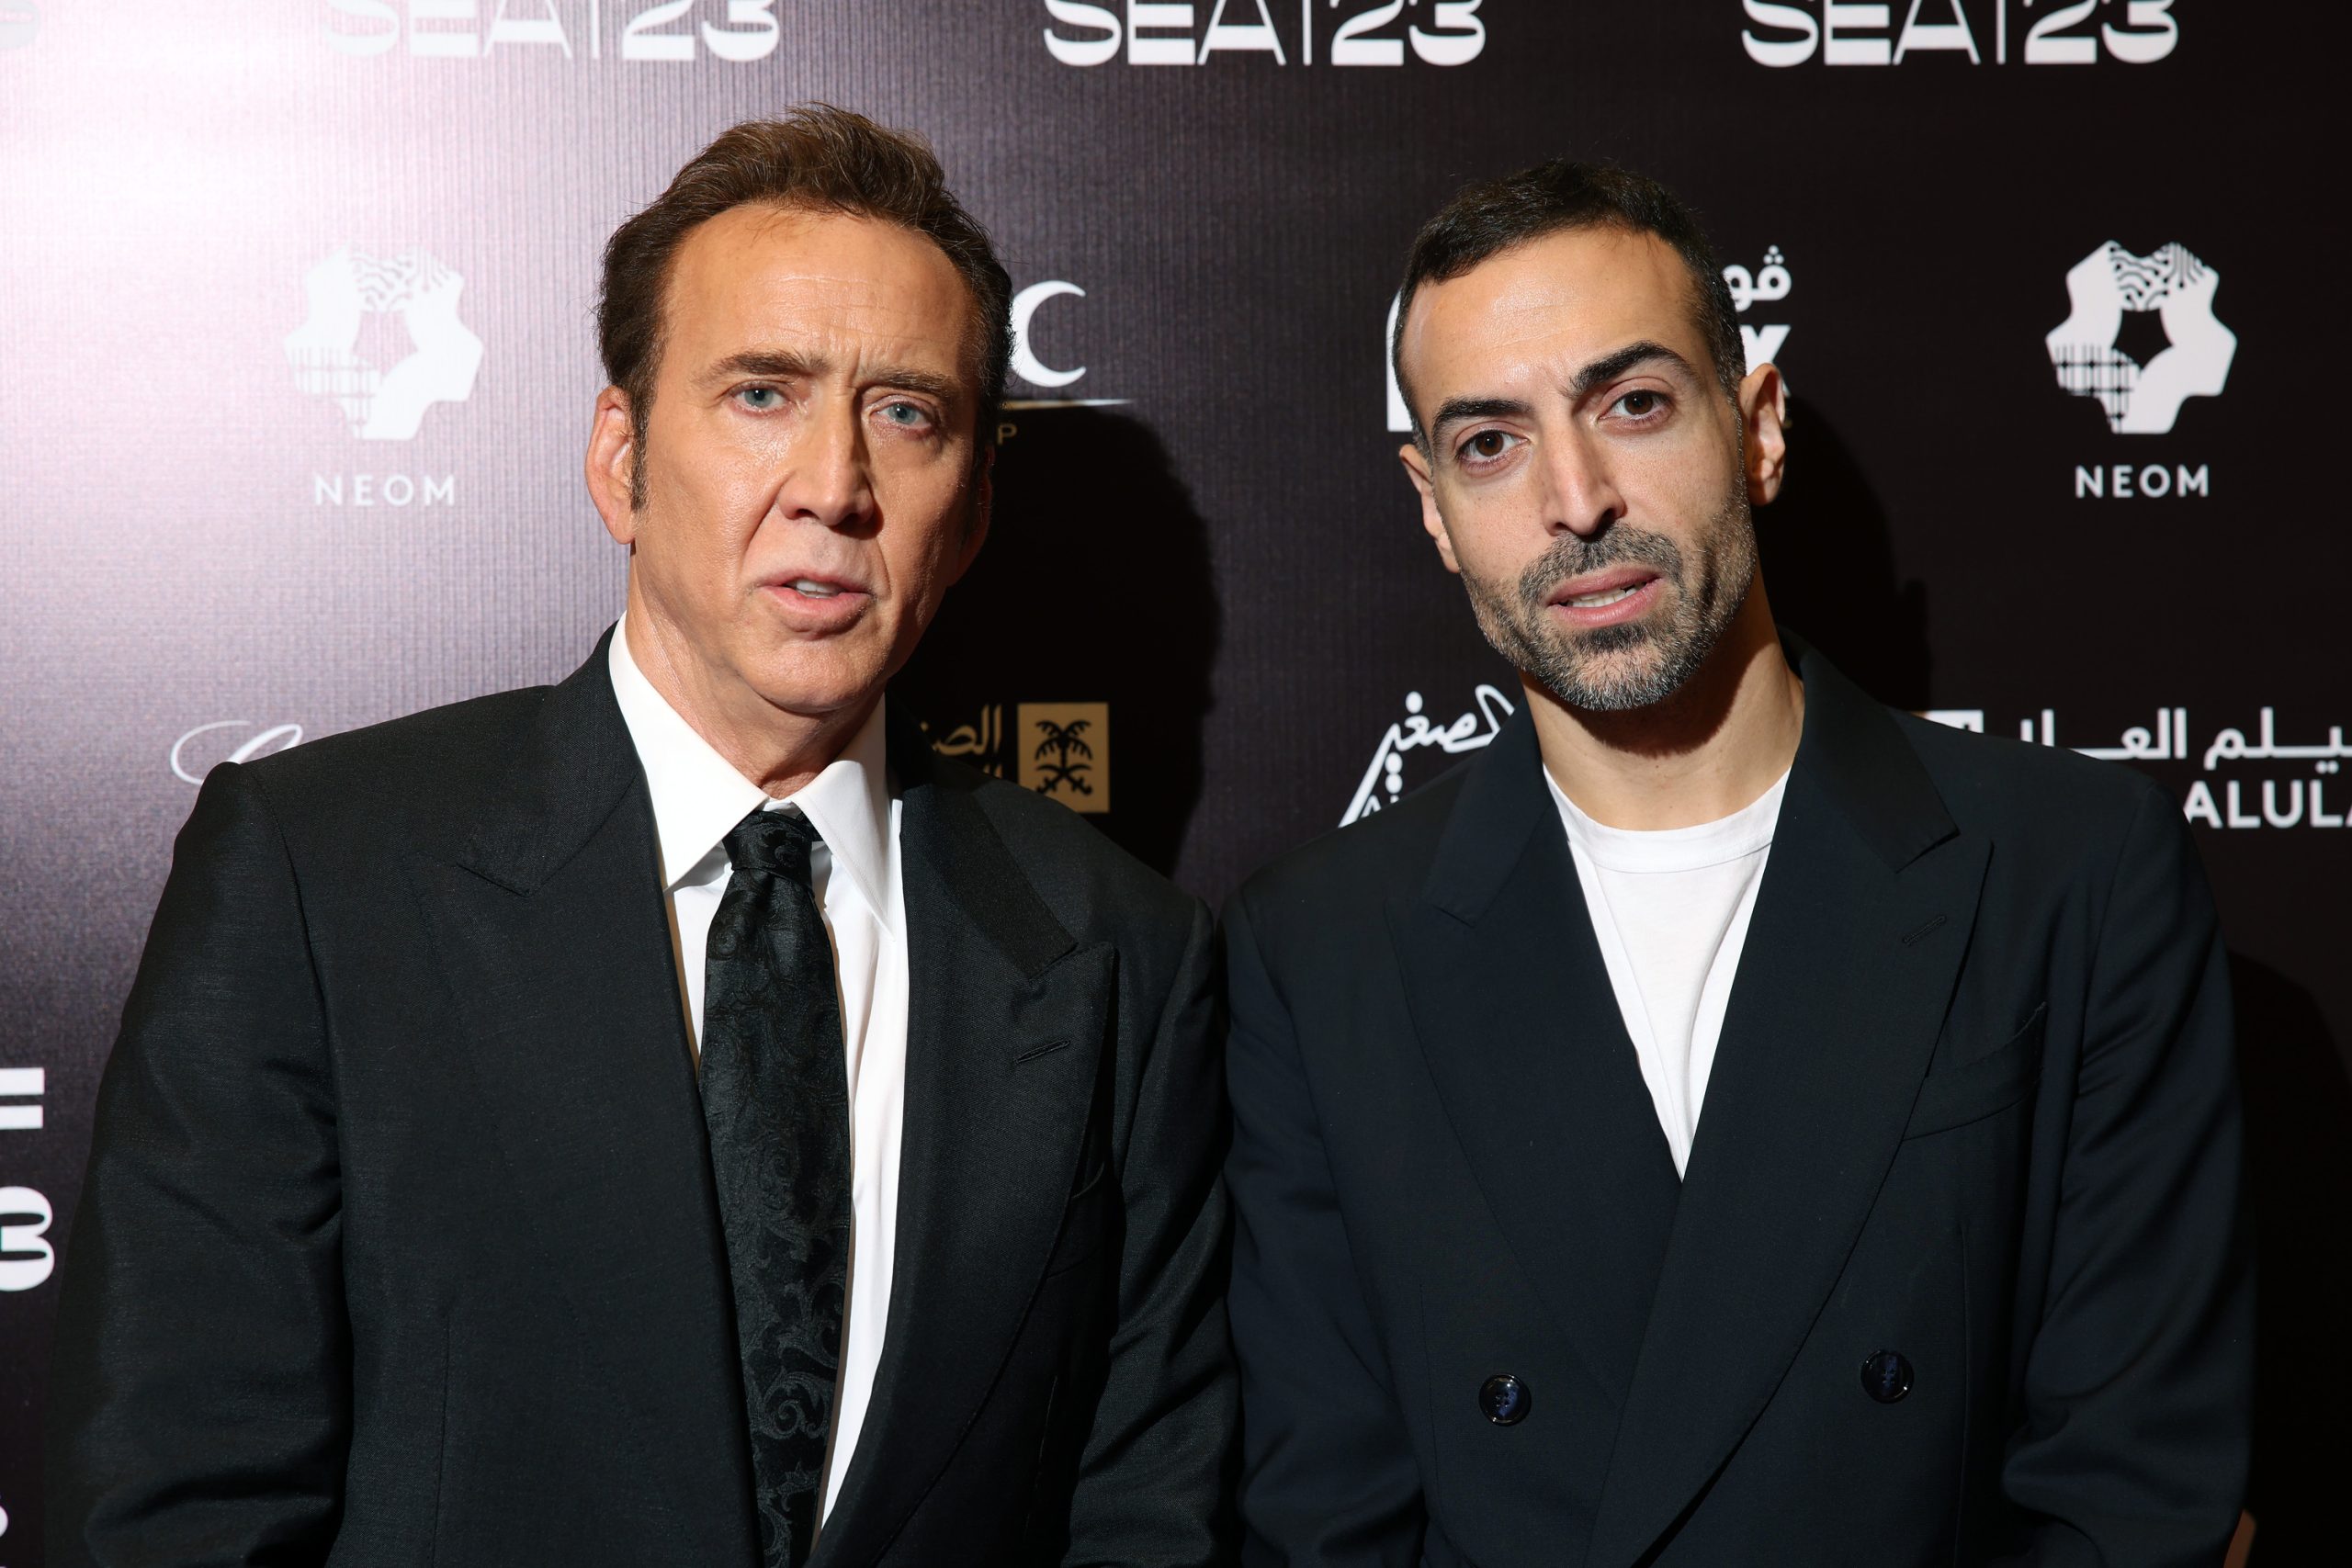 JEDDAH, SAUDI ARABIA - DECEMBER 07: Nicolas Cage and CEO of the Red Sea International Film Festival, Mohammed Al Turki pose during a photocall ahead of the In Conversation With Nicolas Cage during the Red Sea International Film Festival 2023 on December 07, 2023 in Jeddah, Saudi Arabia. (Photo by Daniele Venturelli/Getty Images for The Red Sea International Film Festival)